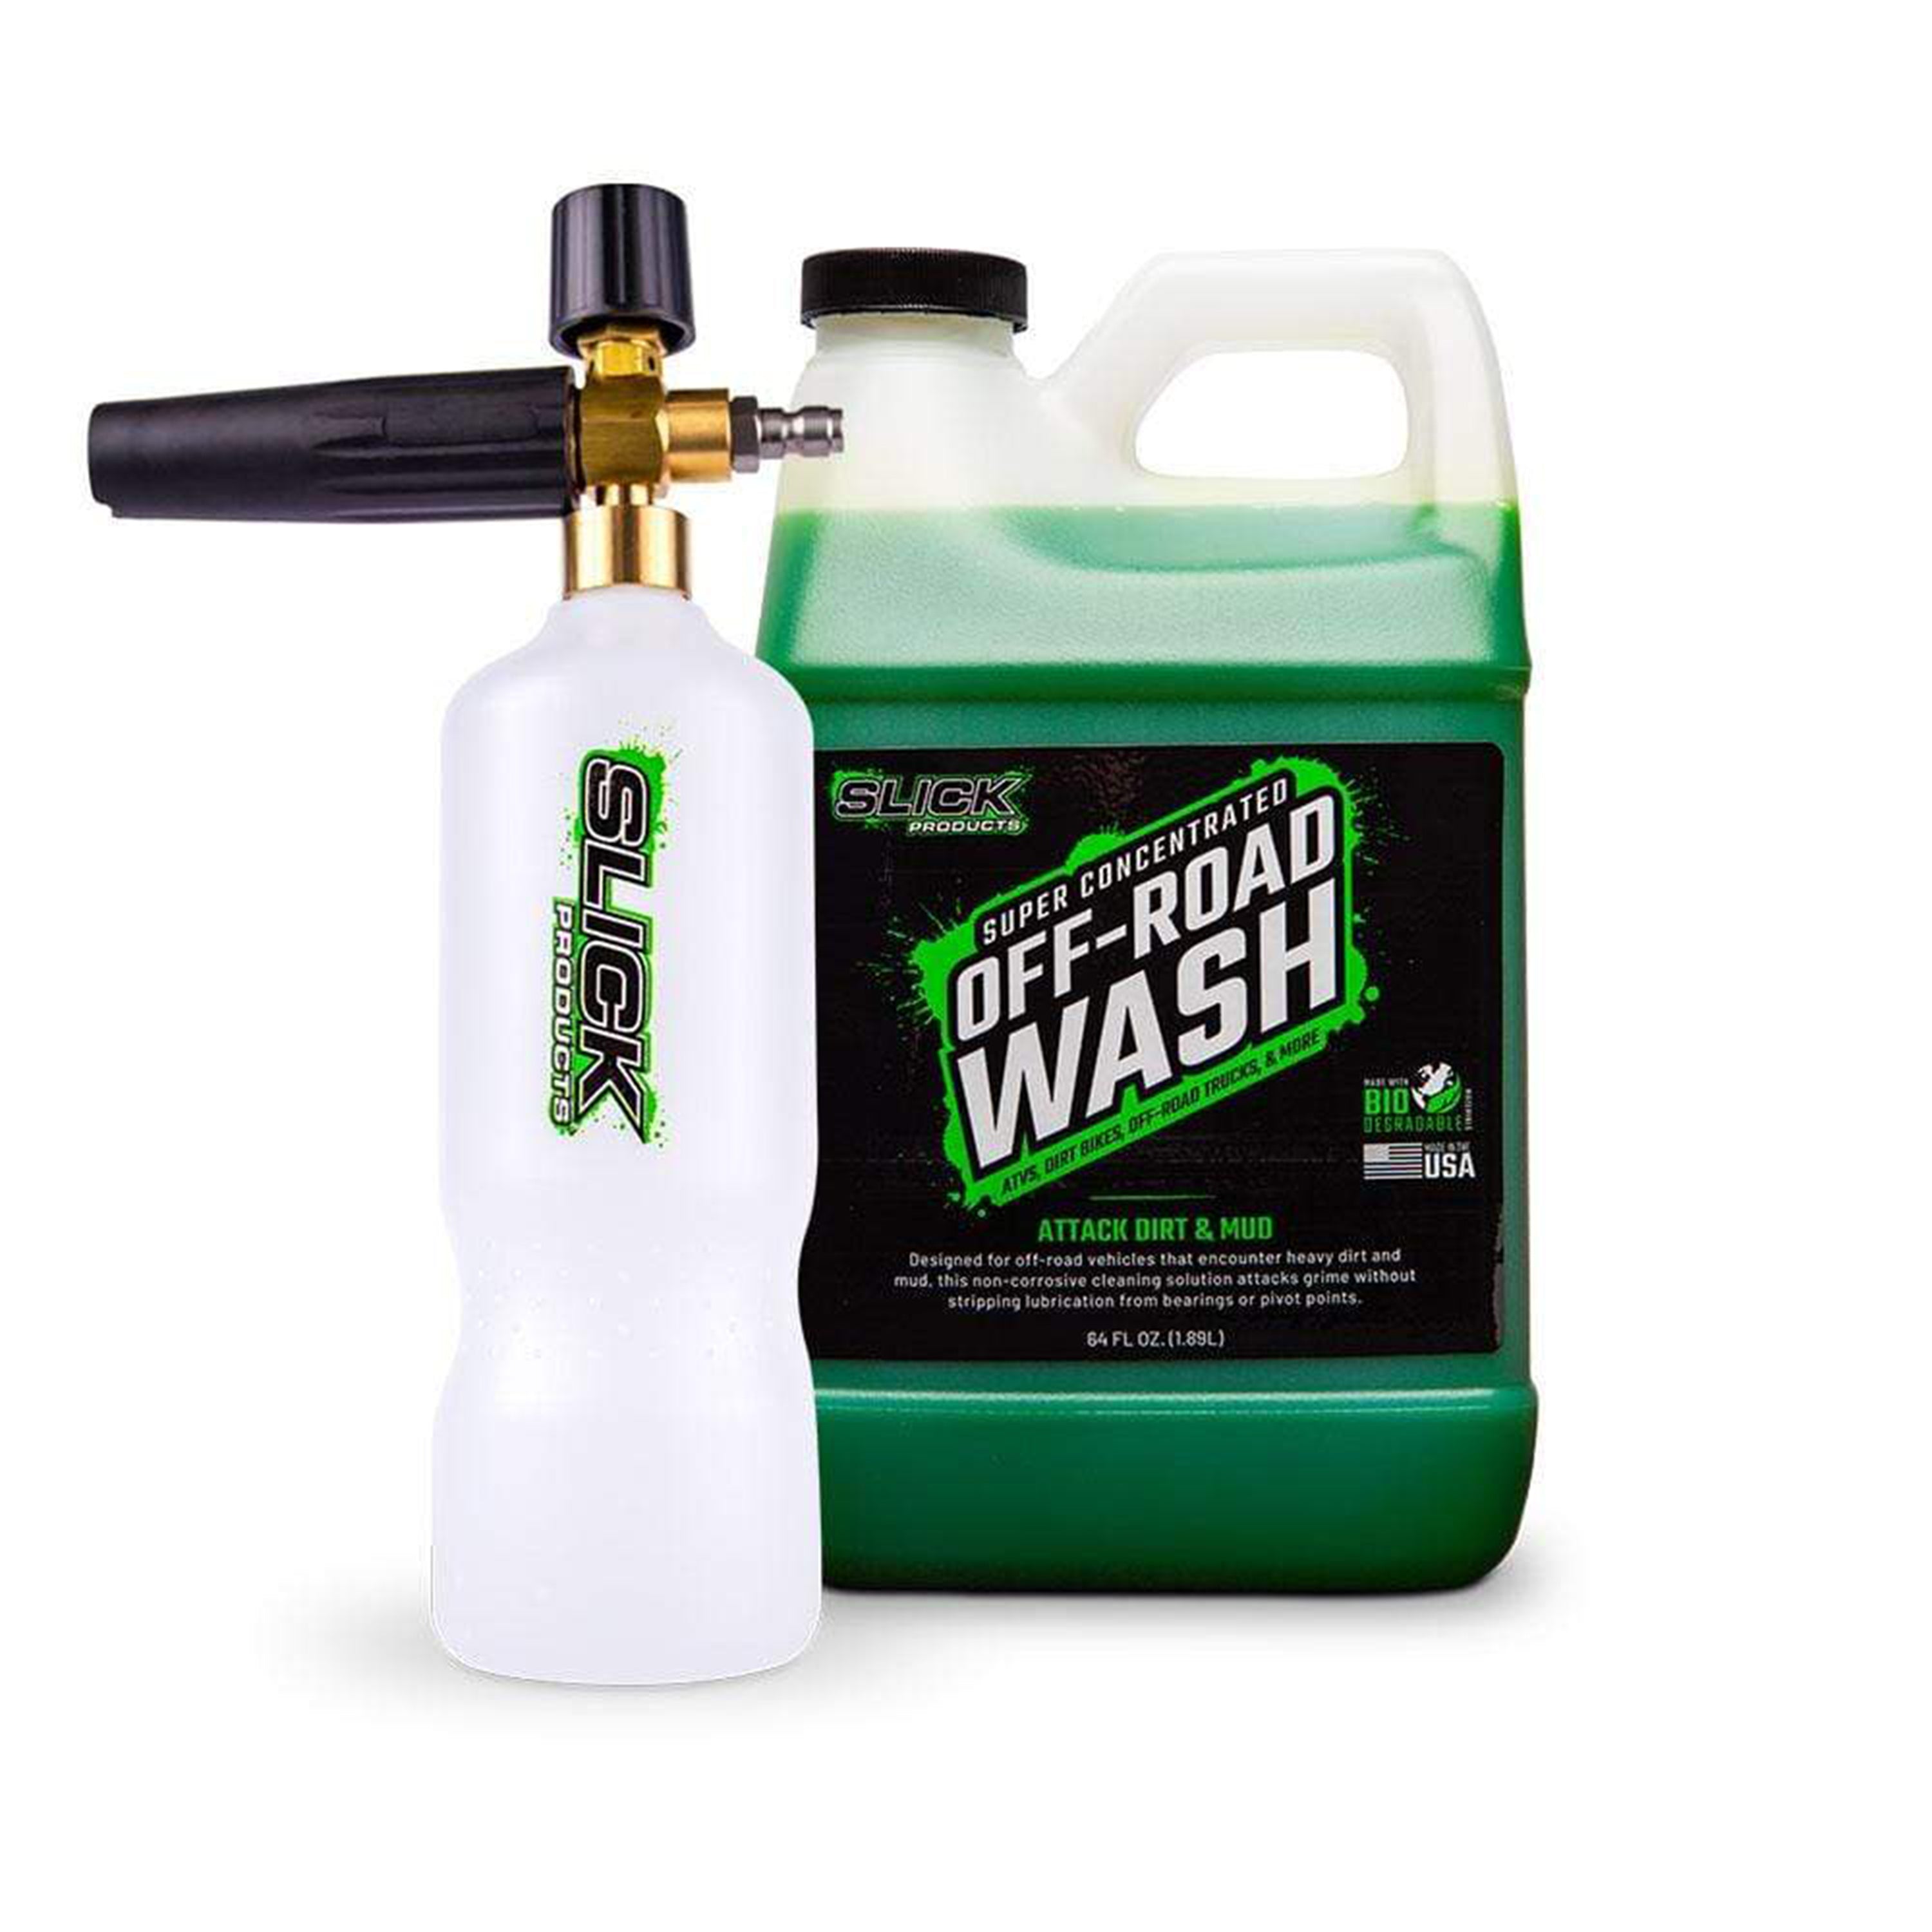 Pressure Washer + Foam Cannon - Washing, Drying, and